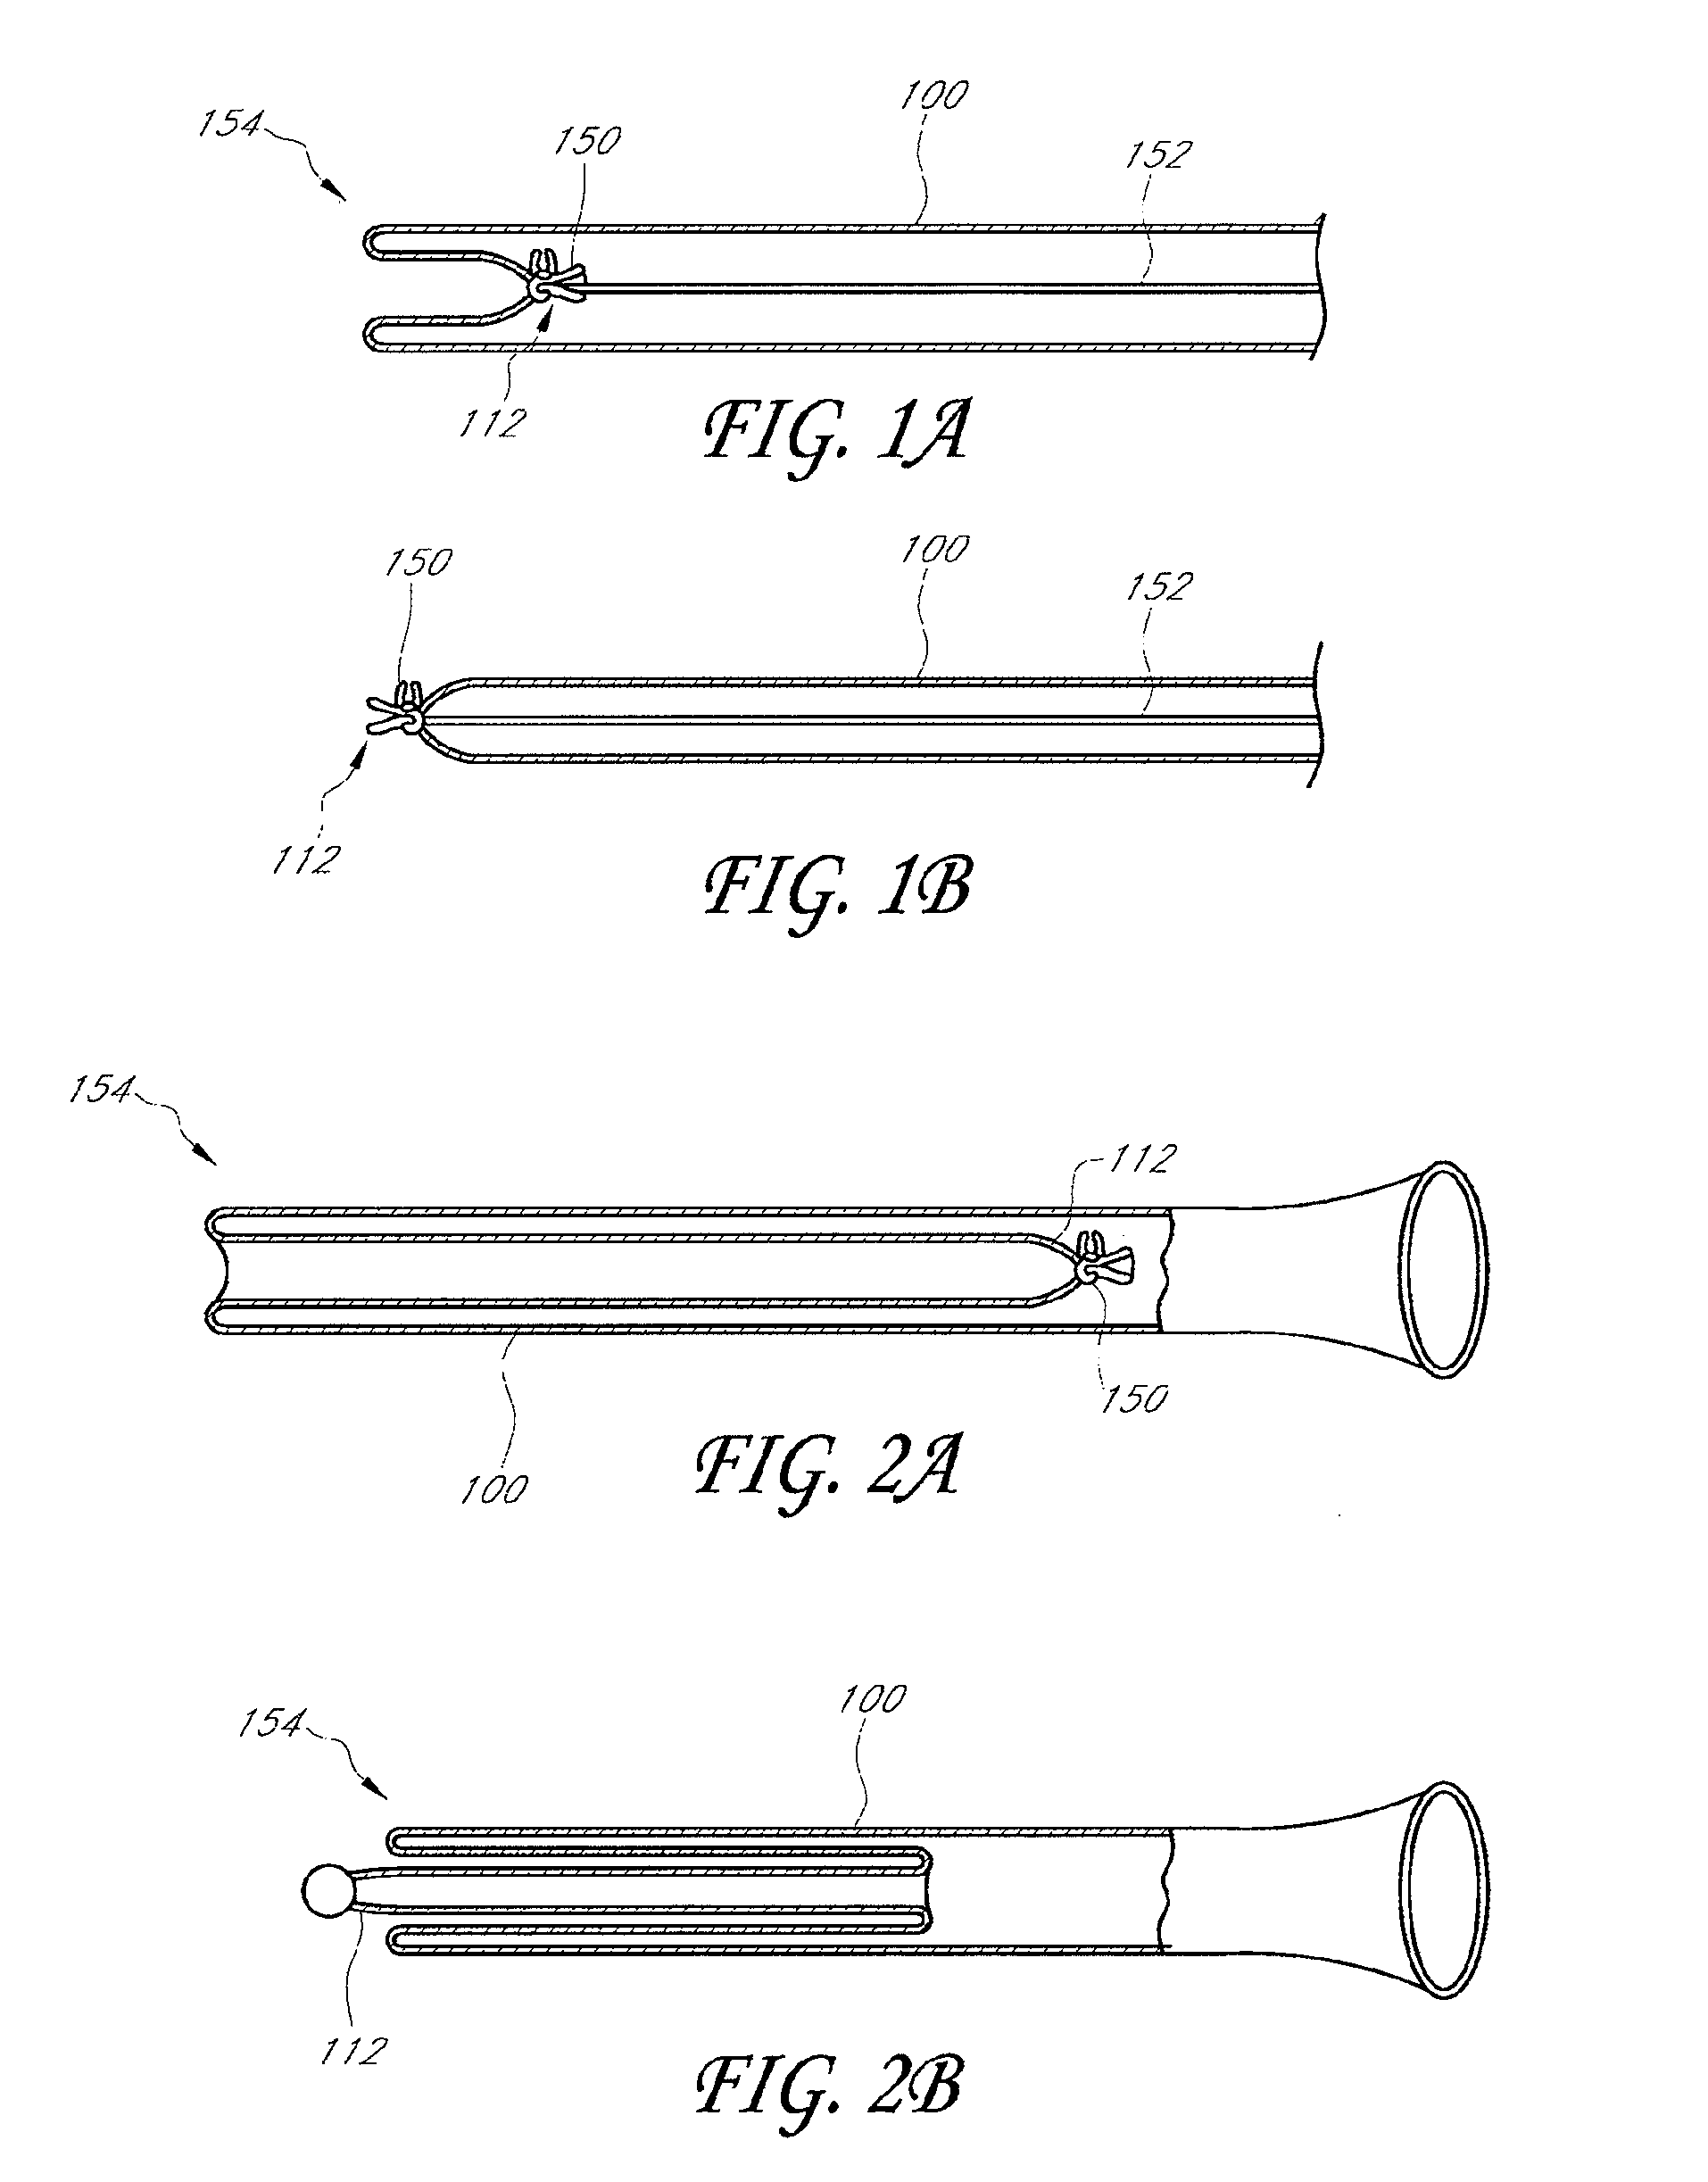 Toposcopic methods and devices for delivering a sleeve having axially compressed and elongate configurations